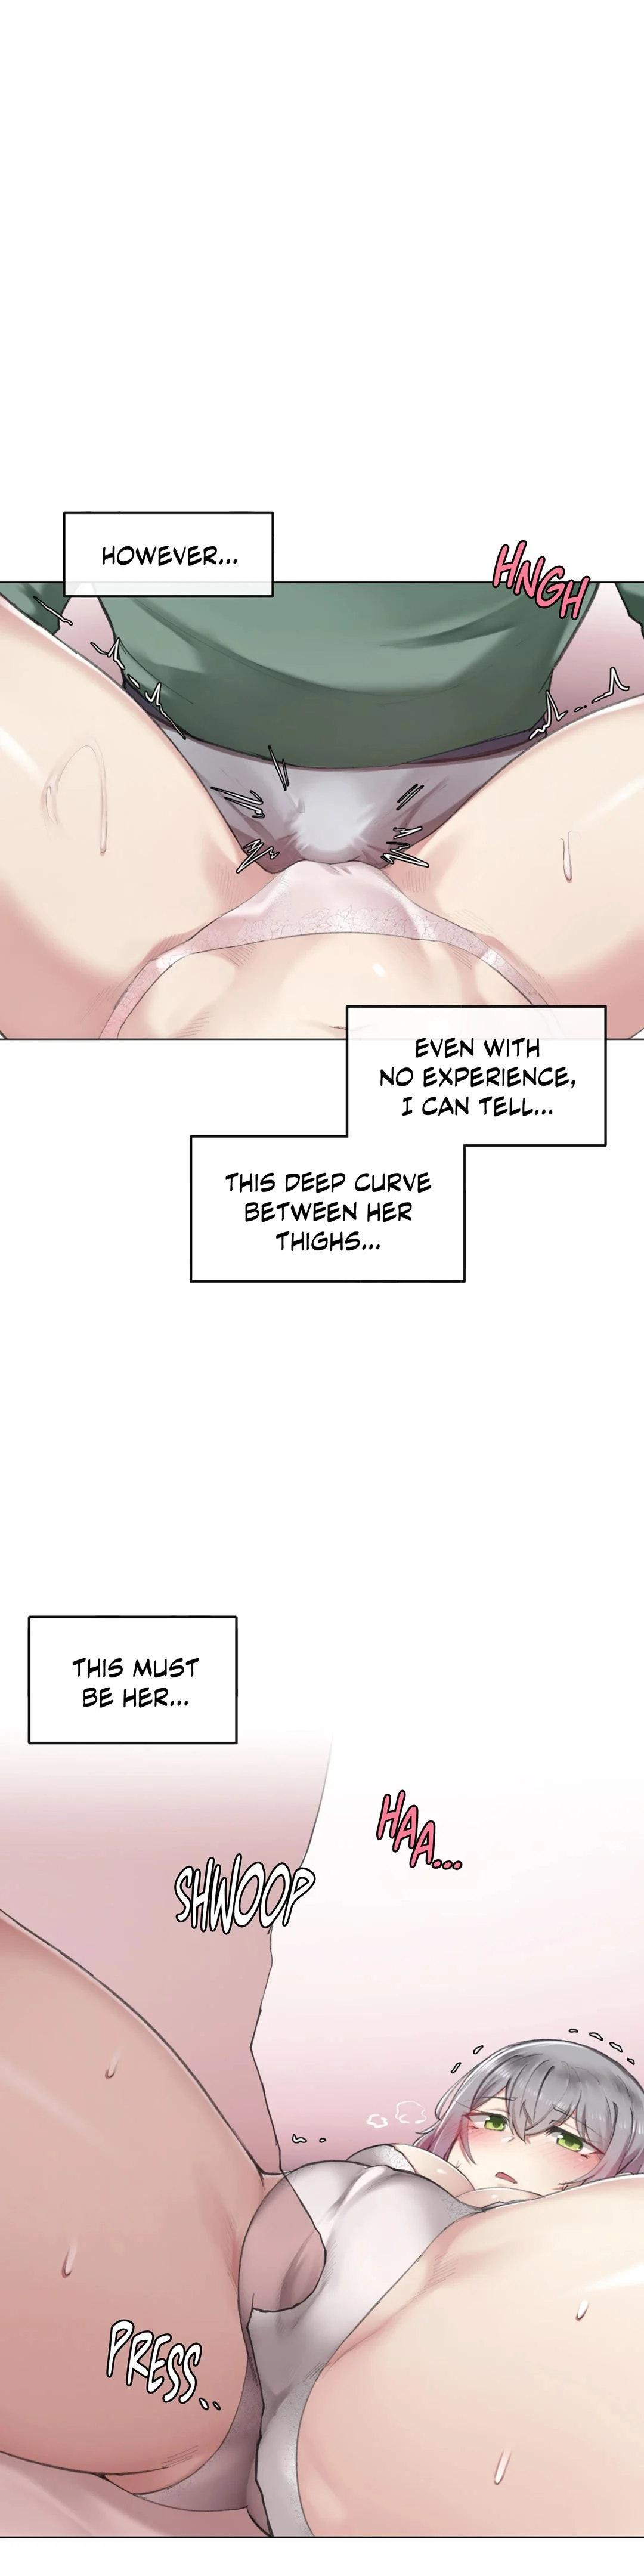 [Dumangoon, KONG_] Sexcape Room: Snap Off Ch.7/7 [English] [Manhwa PDF] Completed 48